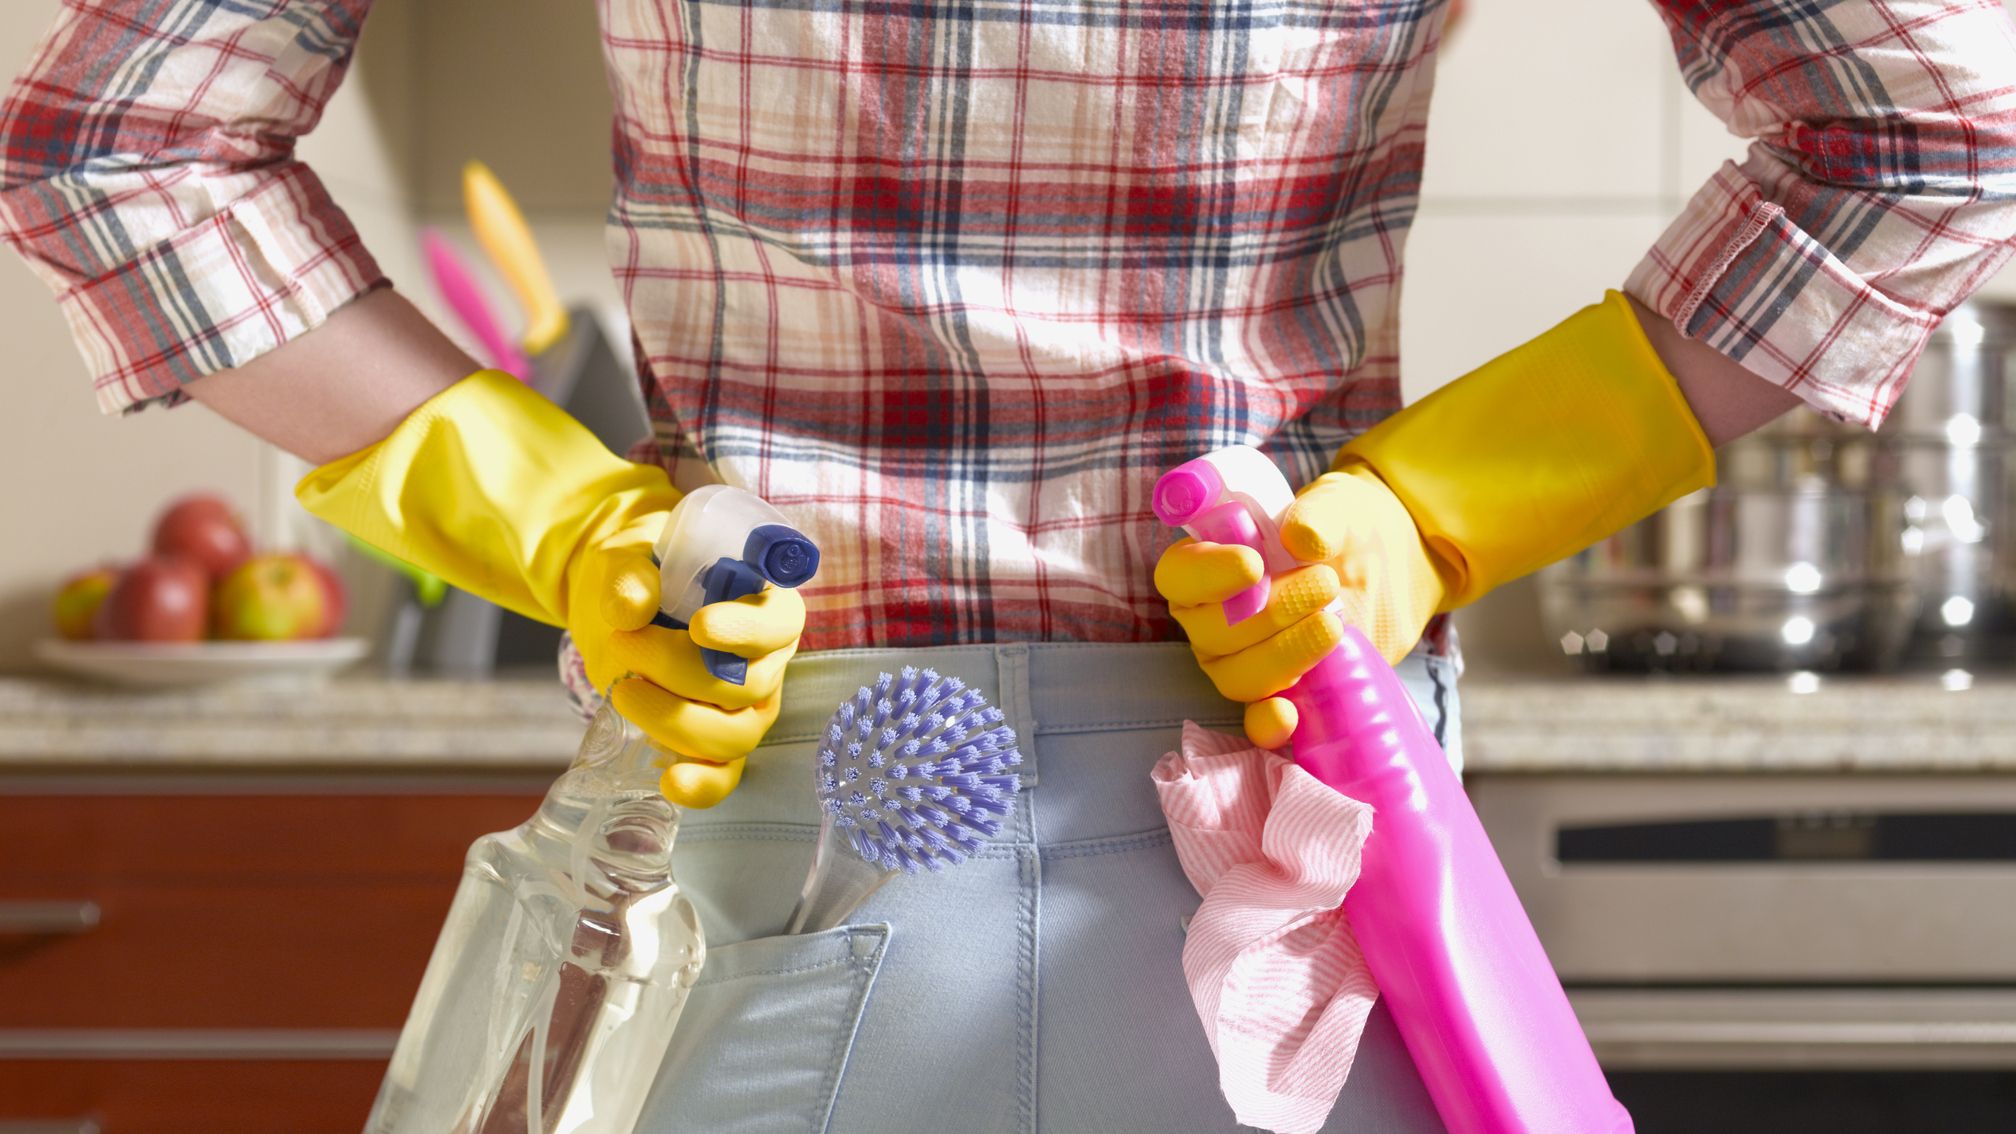 Choosing the Right Cleaning Service: What to Look for and What to Avoid